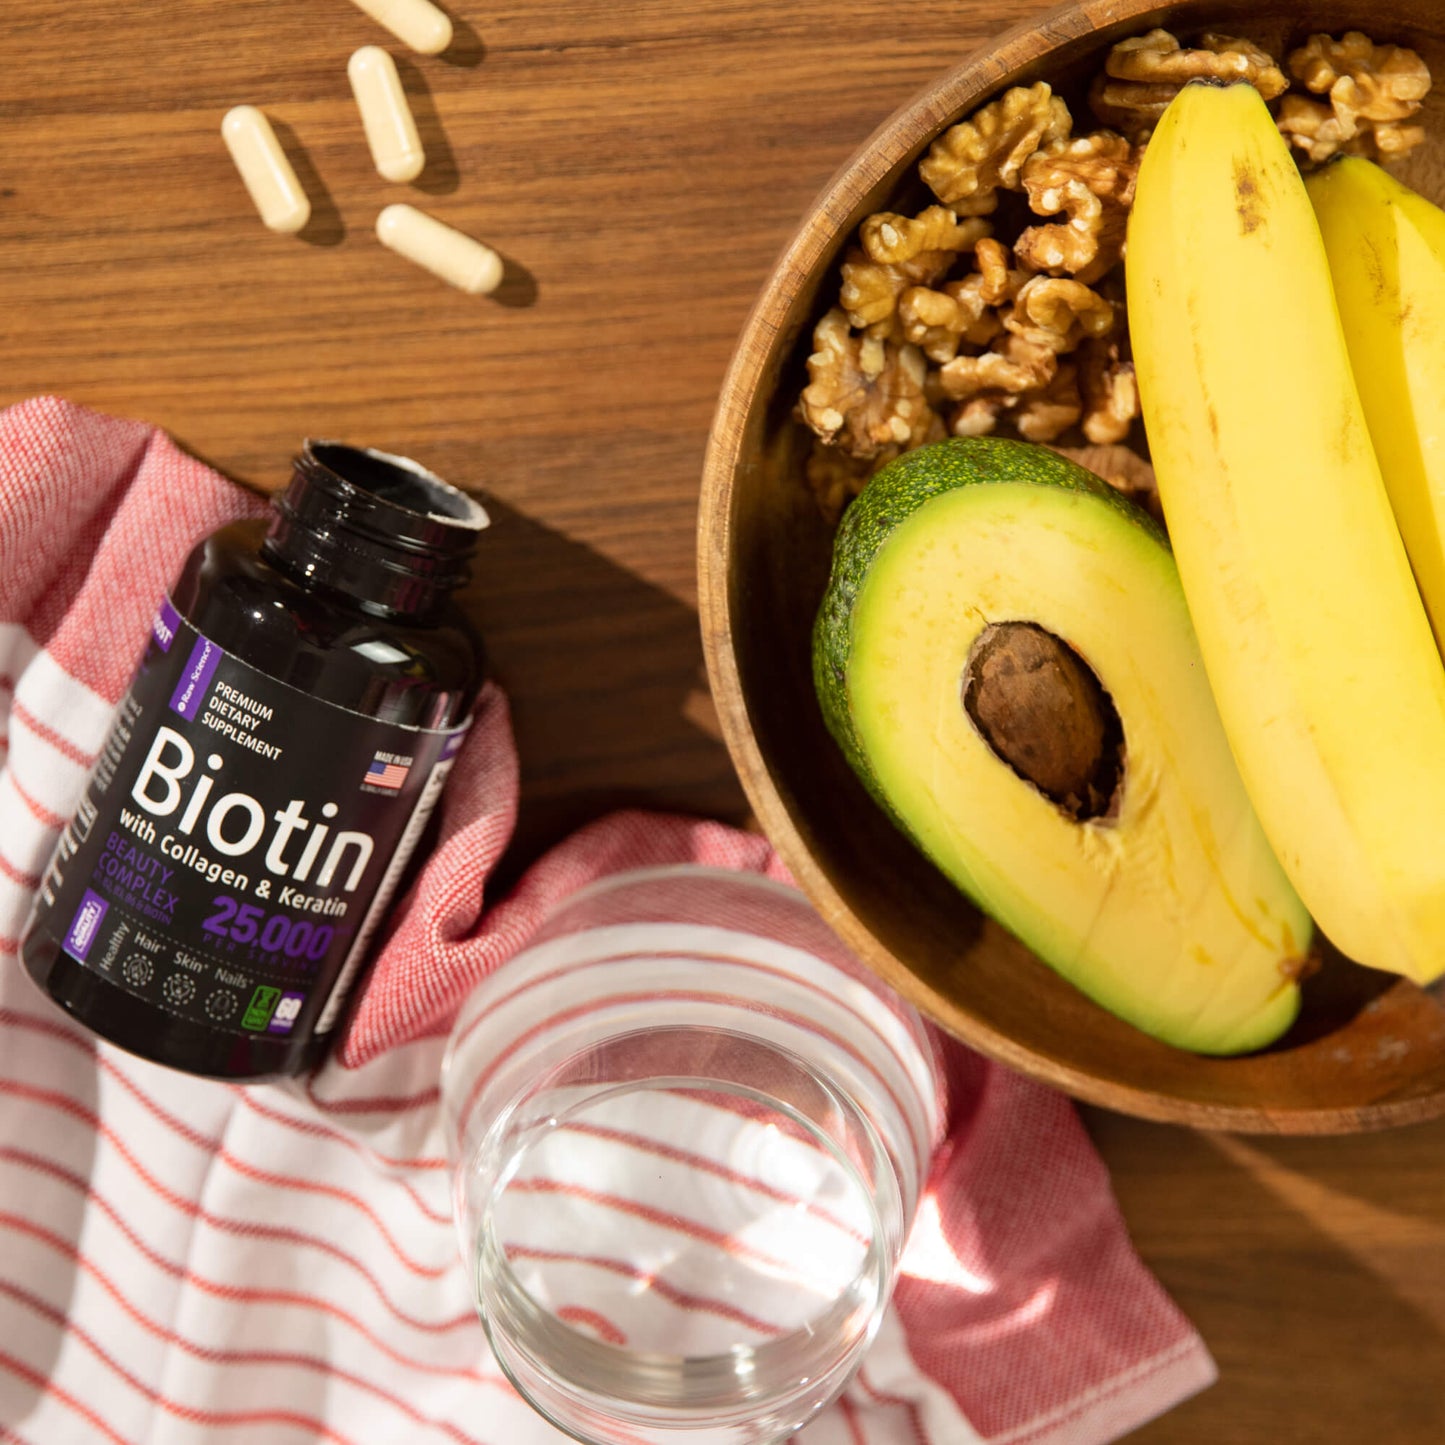 Biotin with Collagen and Keratin Supplement